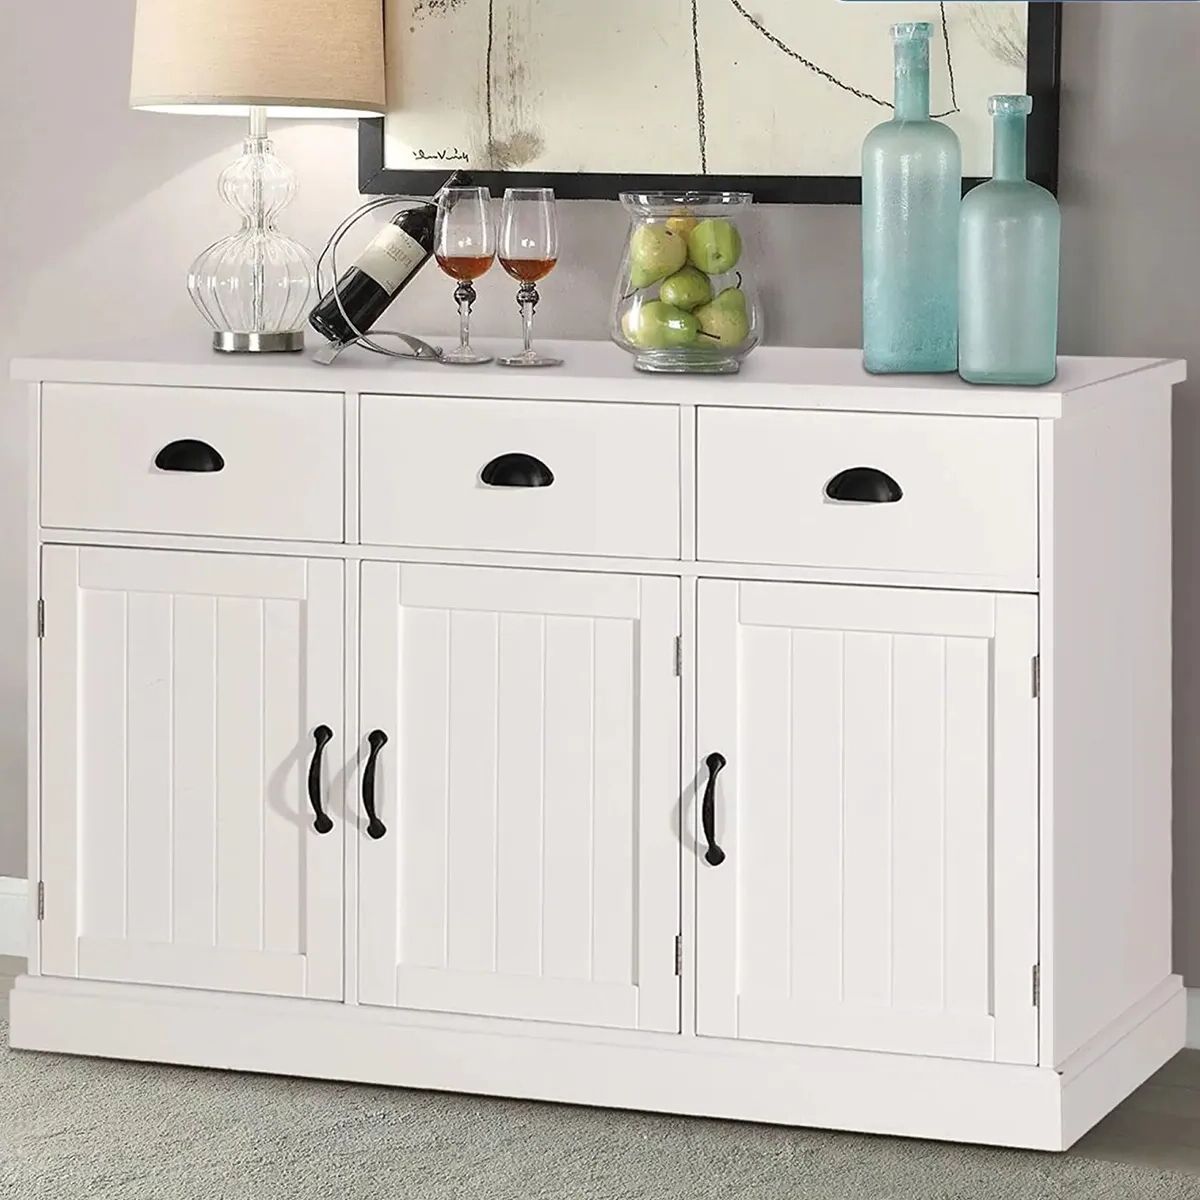 Ebay In Latest 3 Doors Sideboards Storage Cabinet (View 9 of 15)